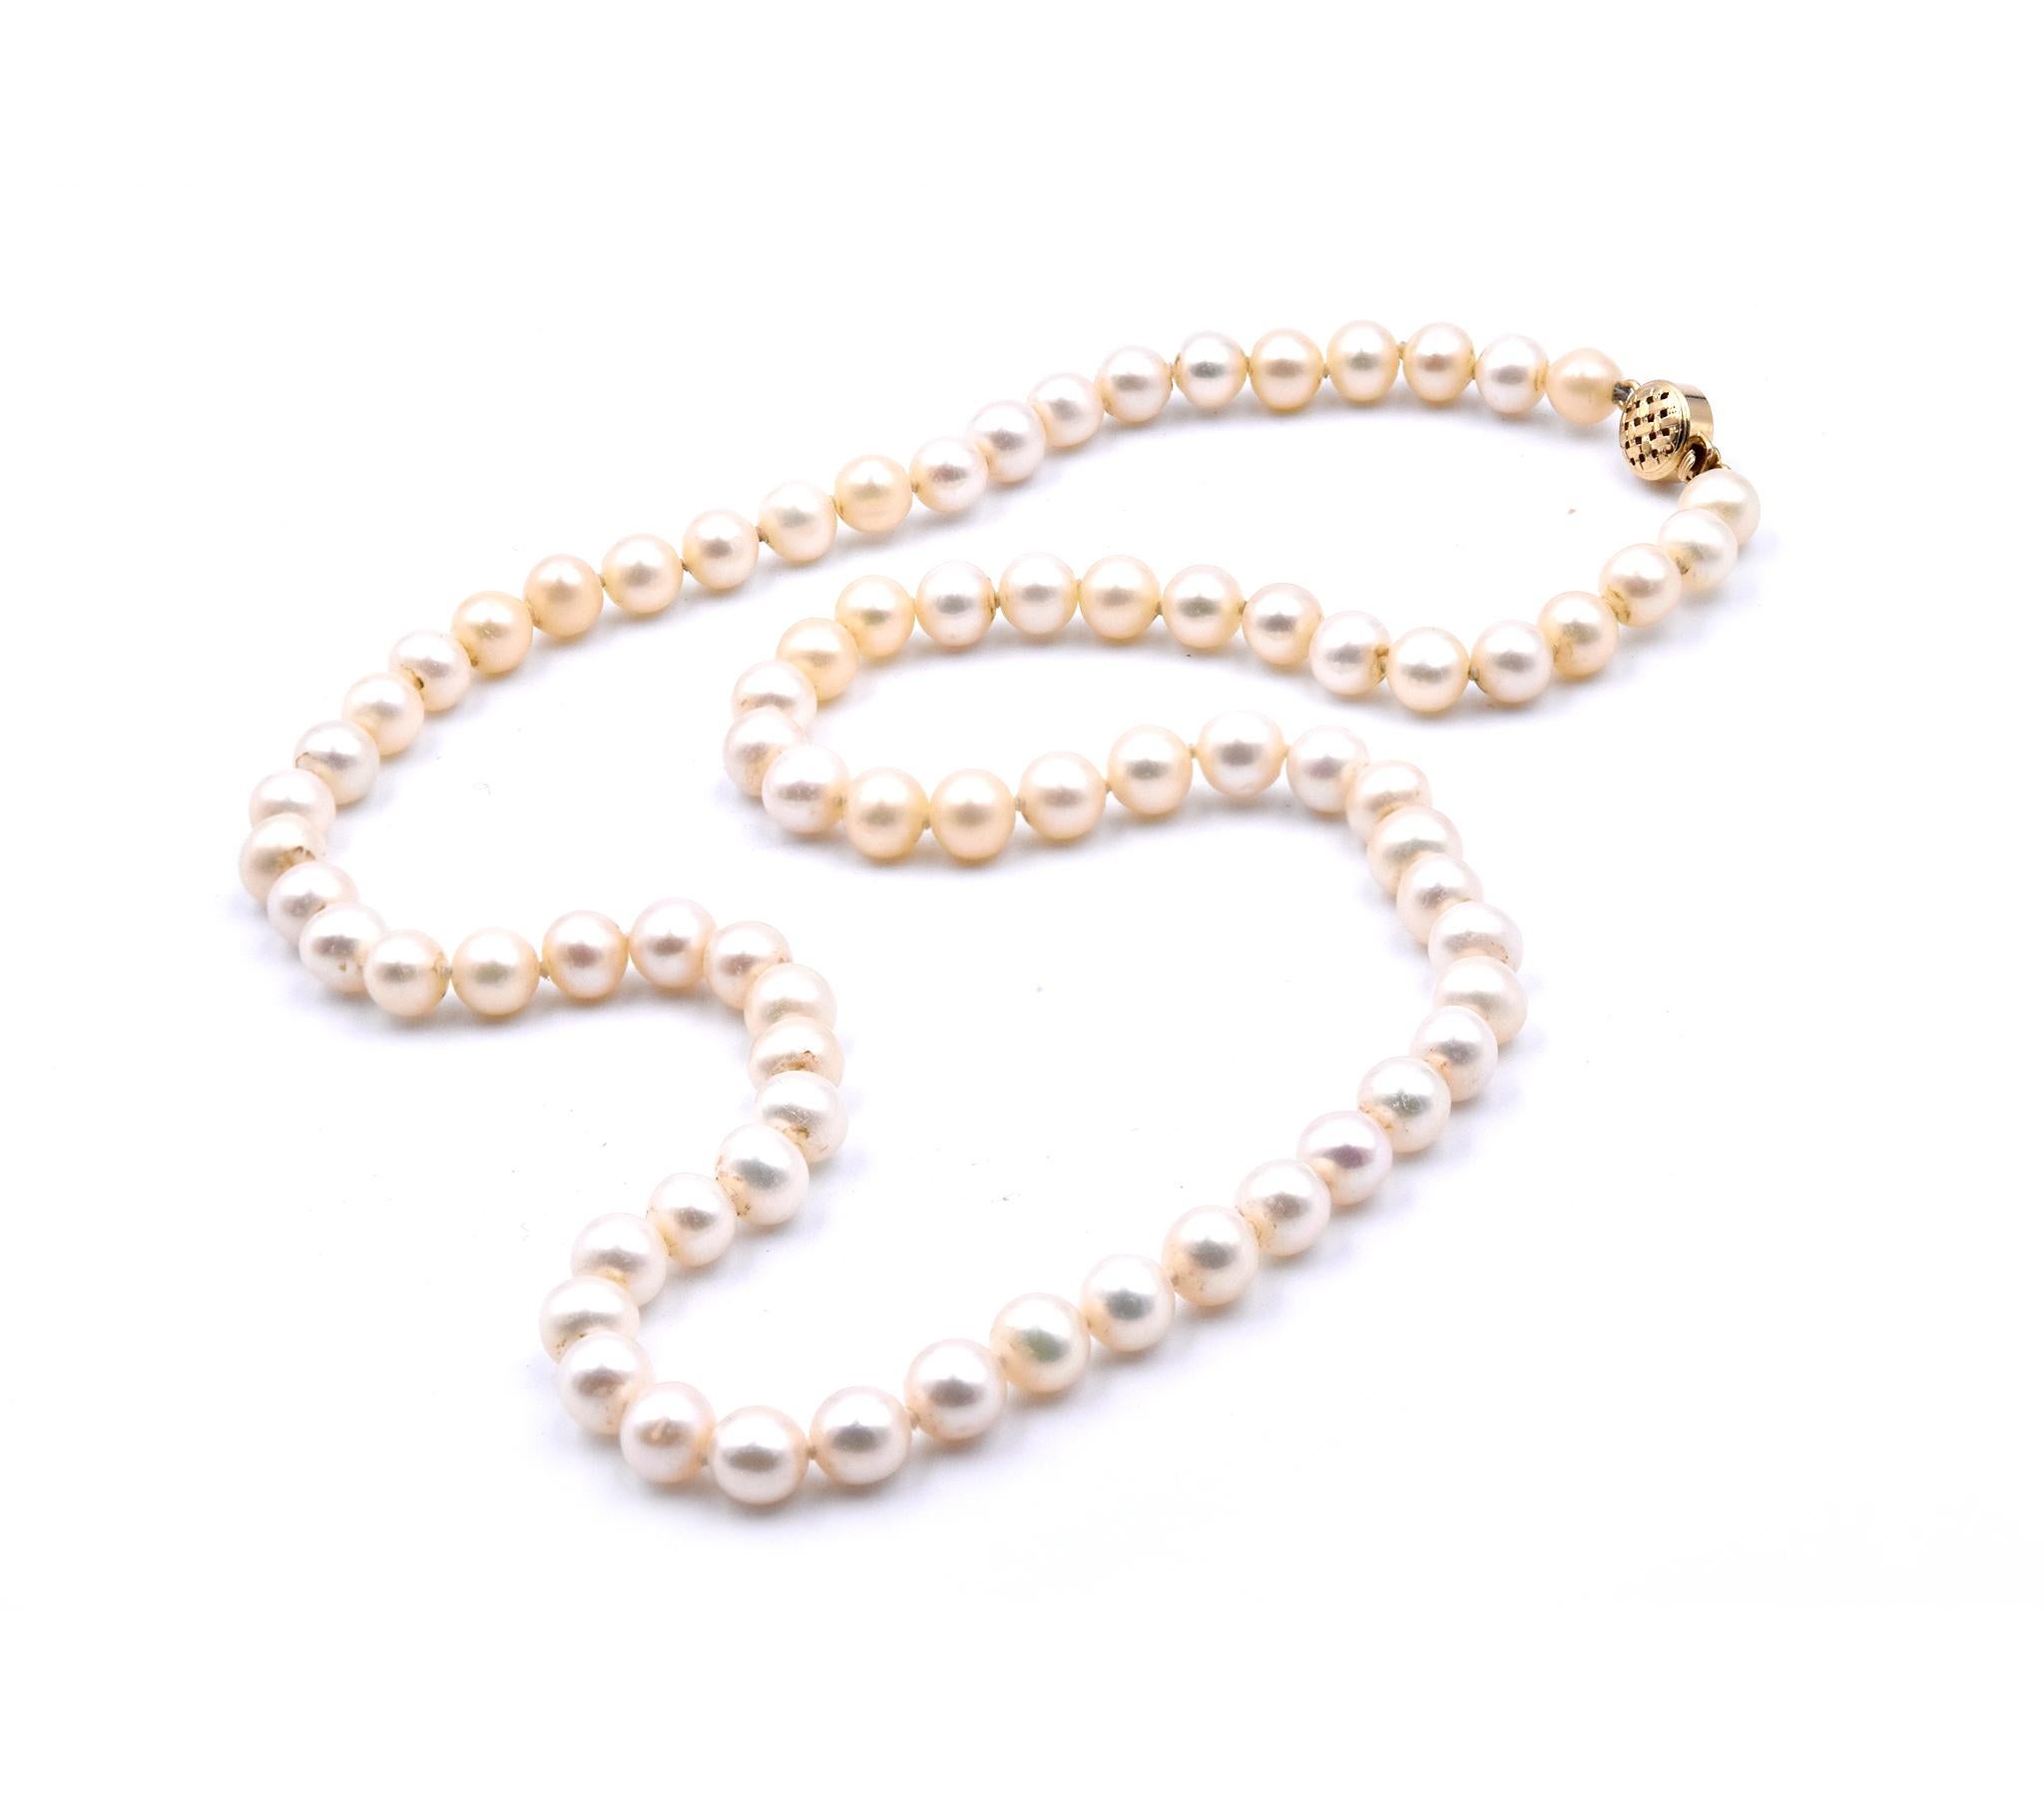 18-inch pearl necklace with 14-karat gold clasp